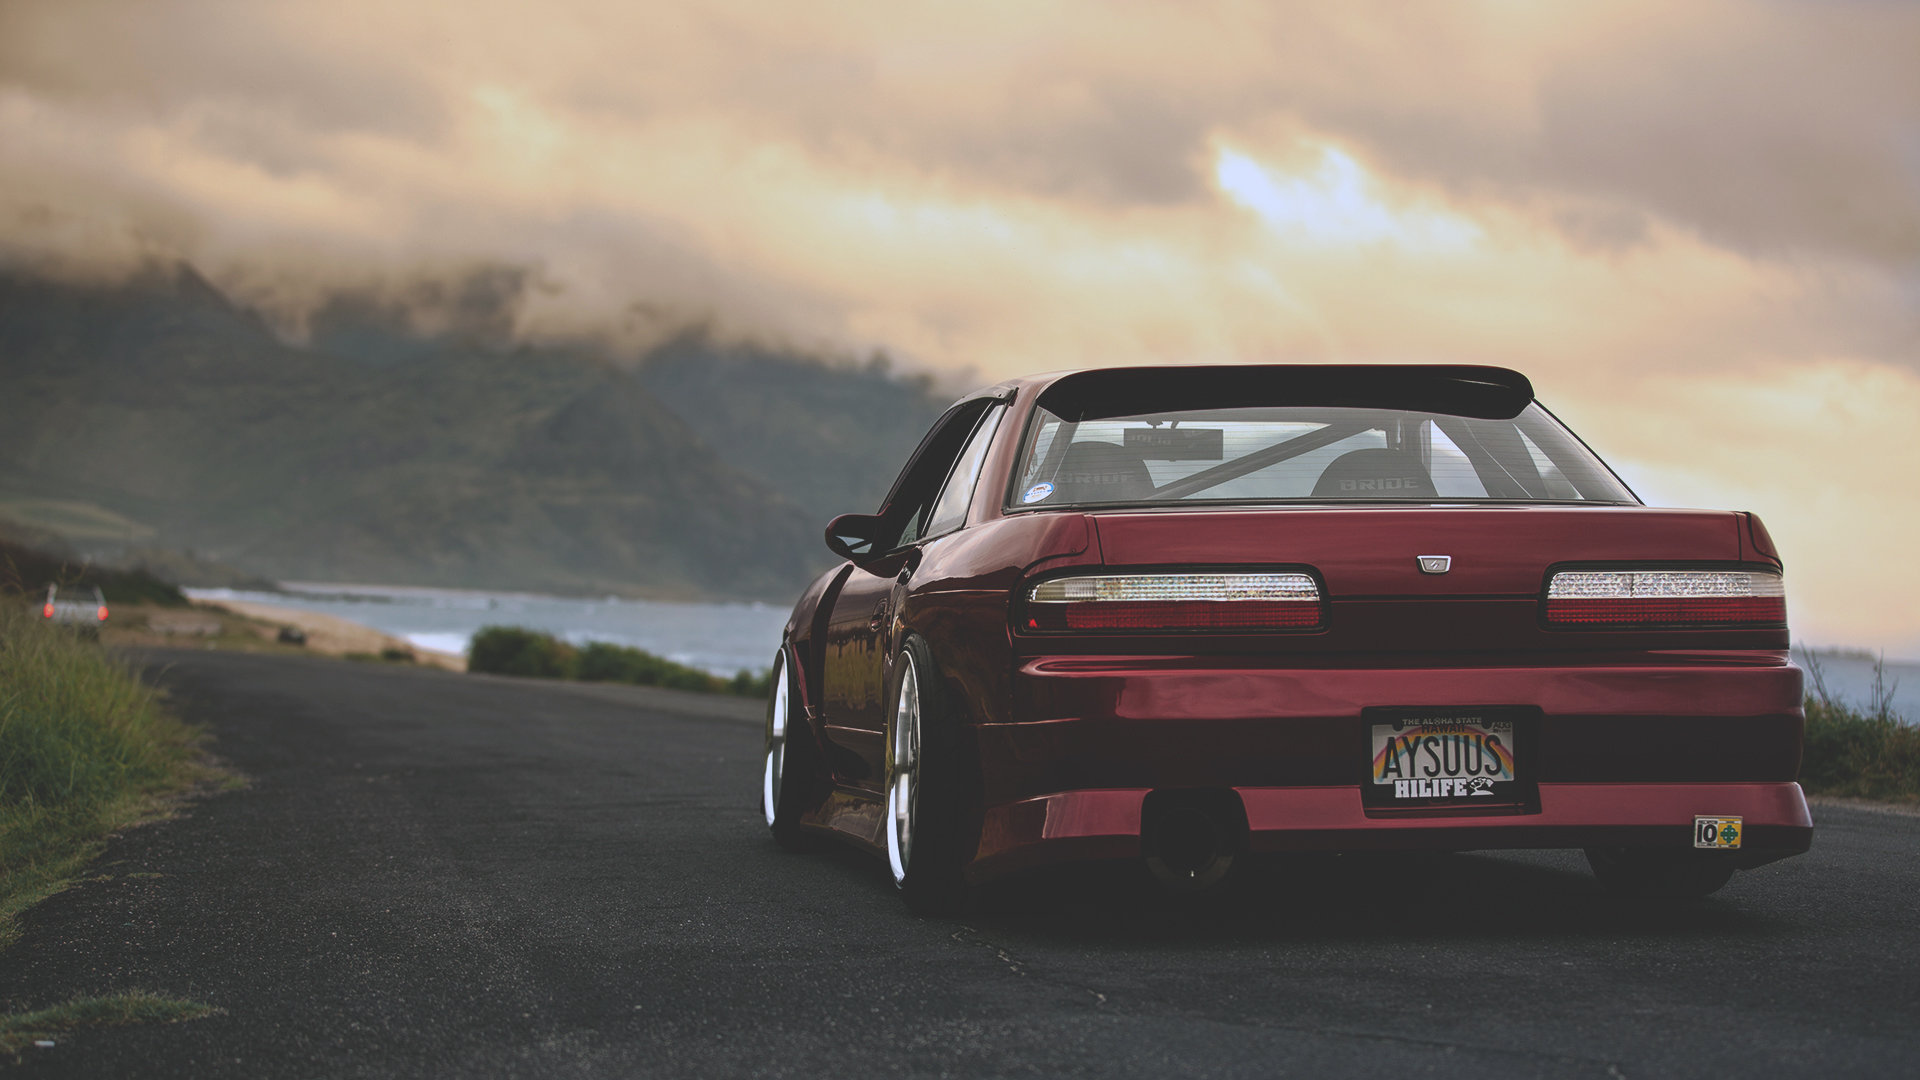 Best Nissan Silvia S14 wallpaper ID:207681 for High Resolution full hd PC